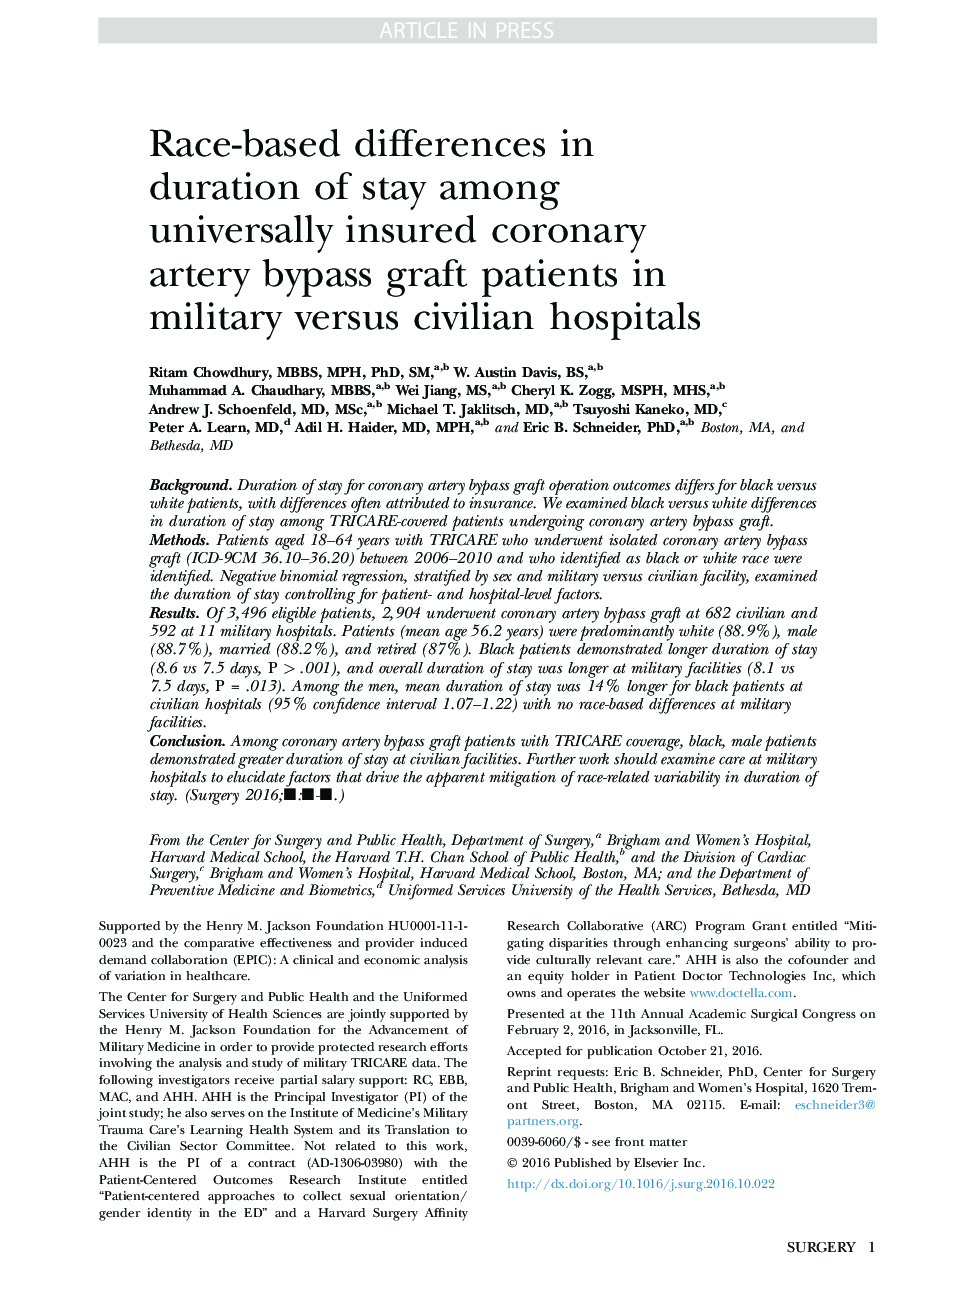 Race-based differences in duration of stay among universally insured coronary artery bypass graft patients in military versus civilian hospitals